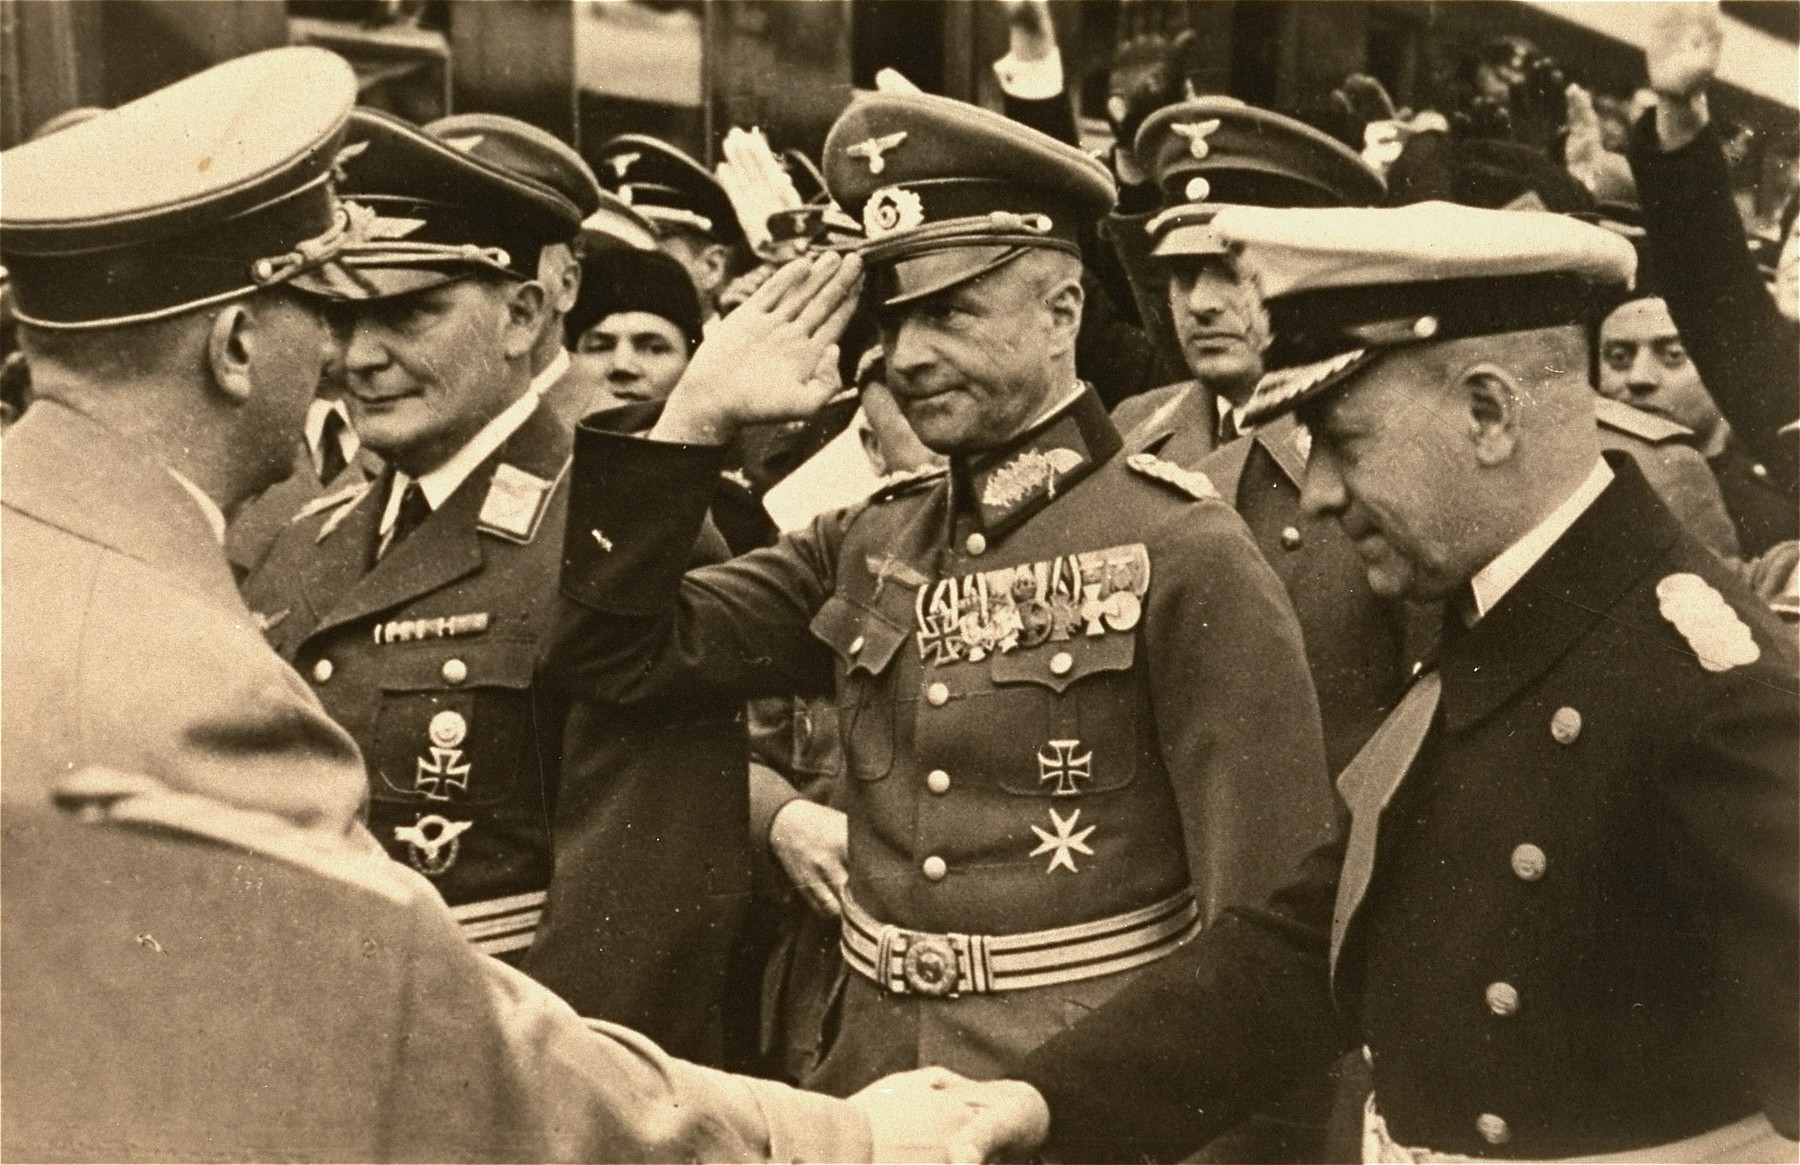 Hitler greets German military leaders at an official ceremony.  

Herman Goering stands at the left.